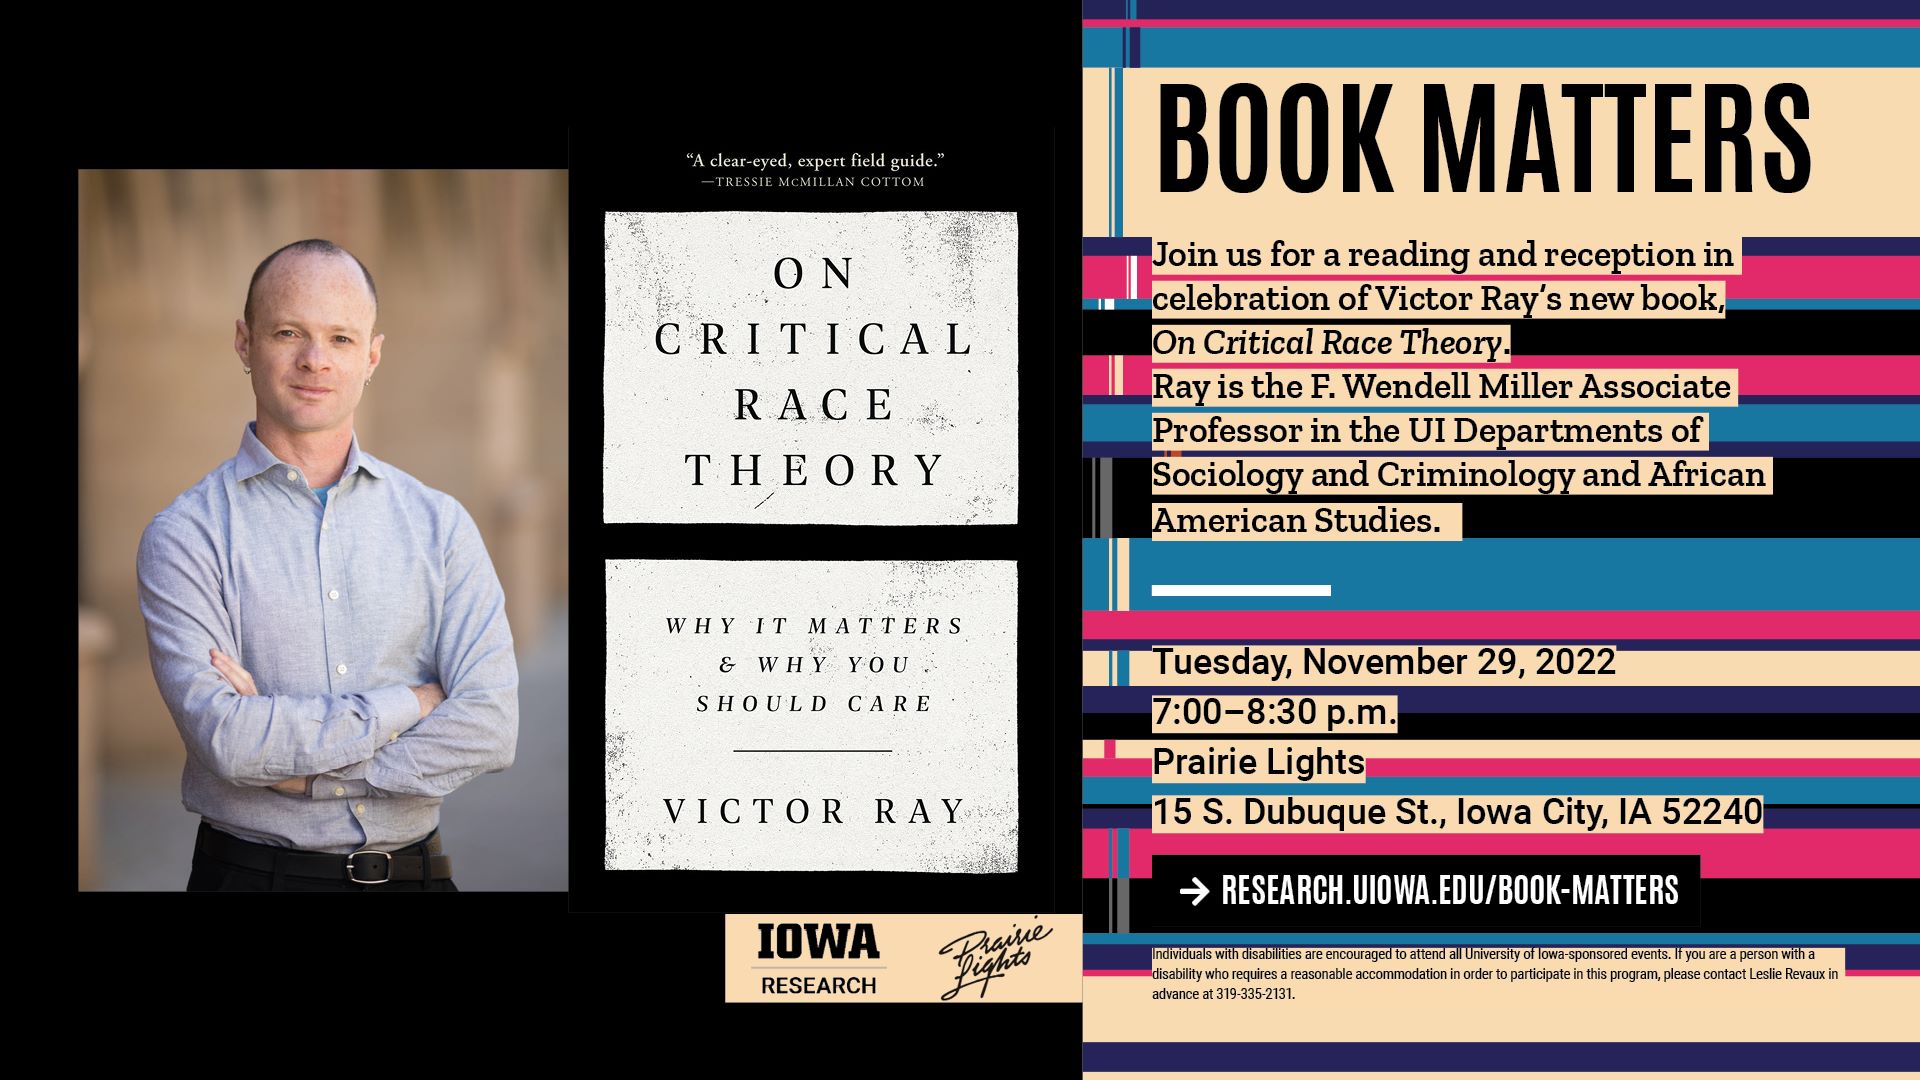 Join us for a reading and reception in celebration of Victor Ray's new book 'On Critical Race Theory.' November 29th, 7pm-8:30pm at Prairie Lights